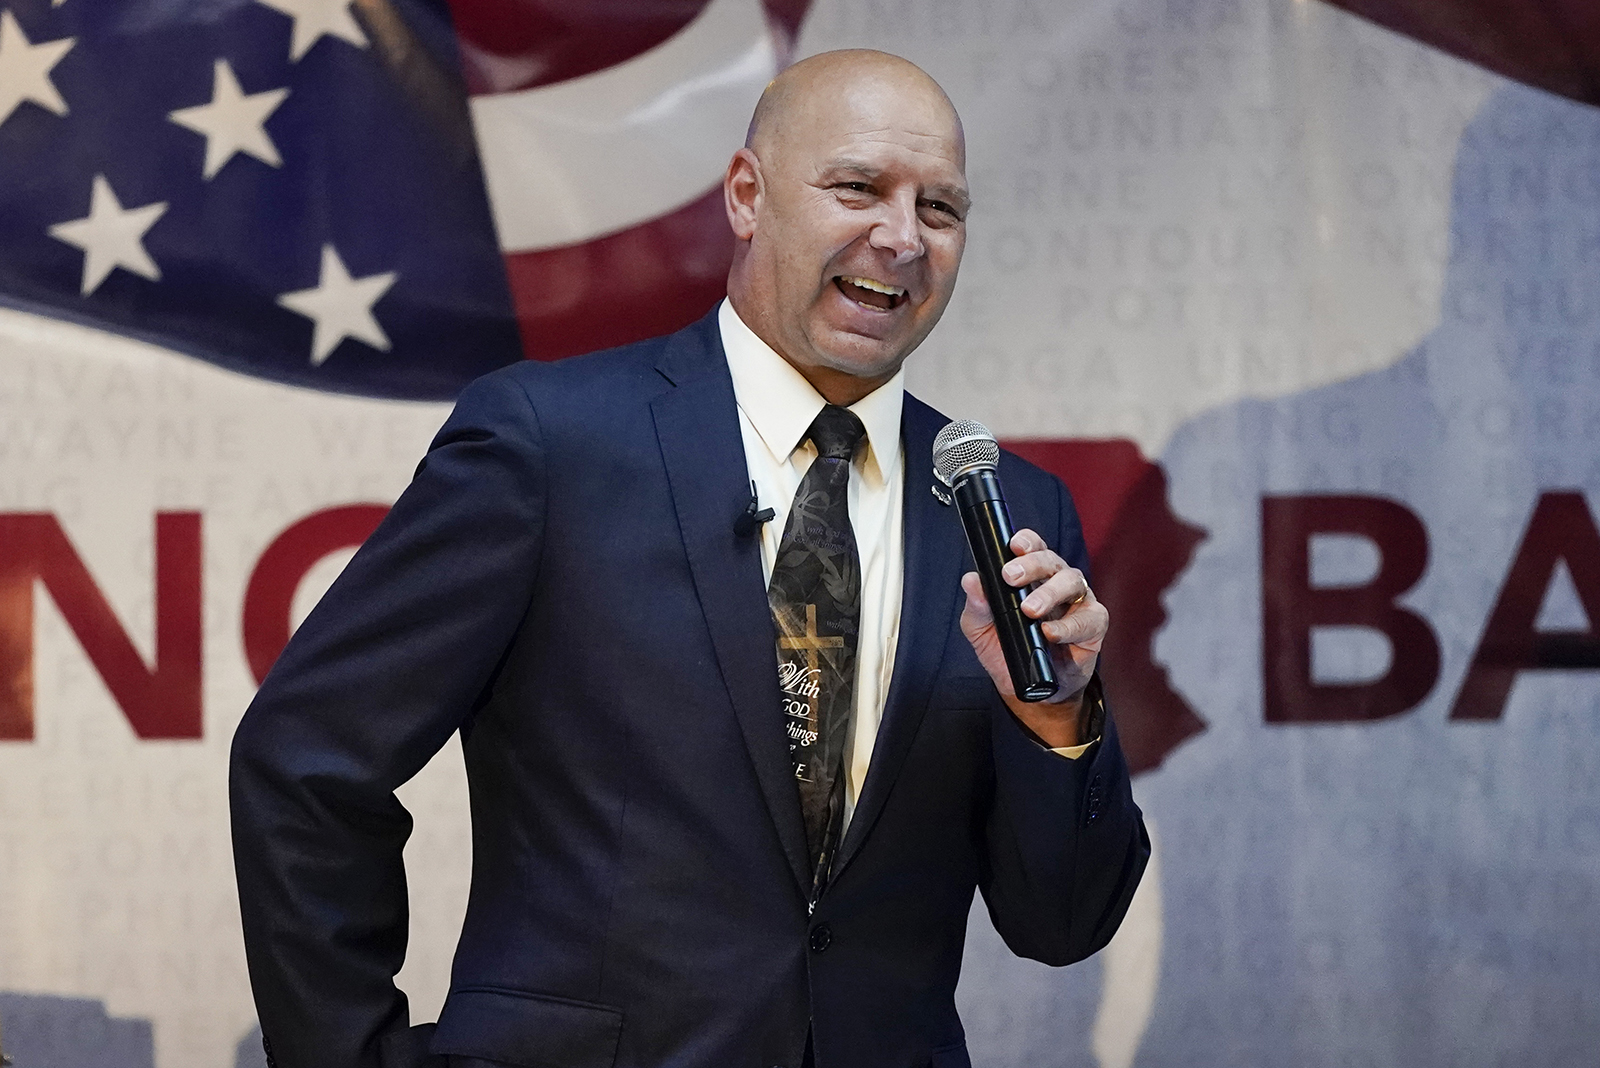 State Sen. Doug Mastriano, R-Franklin, a Republican candidate for governor of Pennsylvania, speaks at a primary night election gathering in Chambersburg, Pennsylvania, May 17, 2022. (AP Photo/Carolyn Kaster)